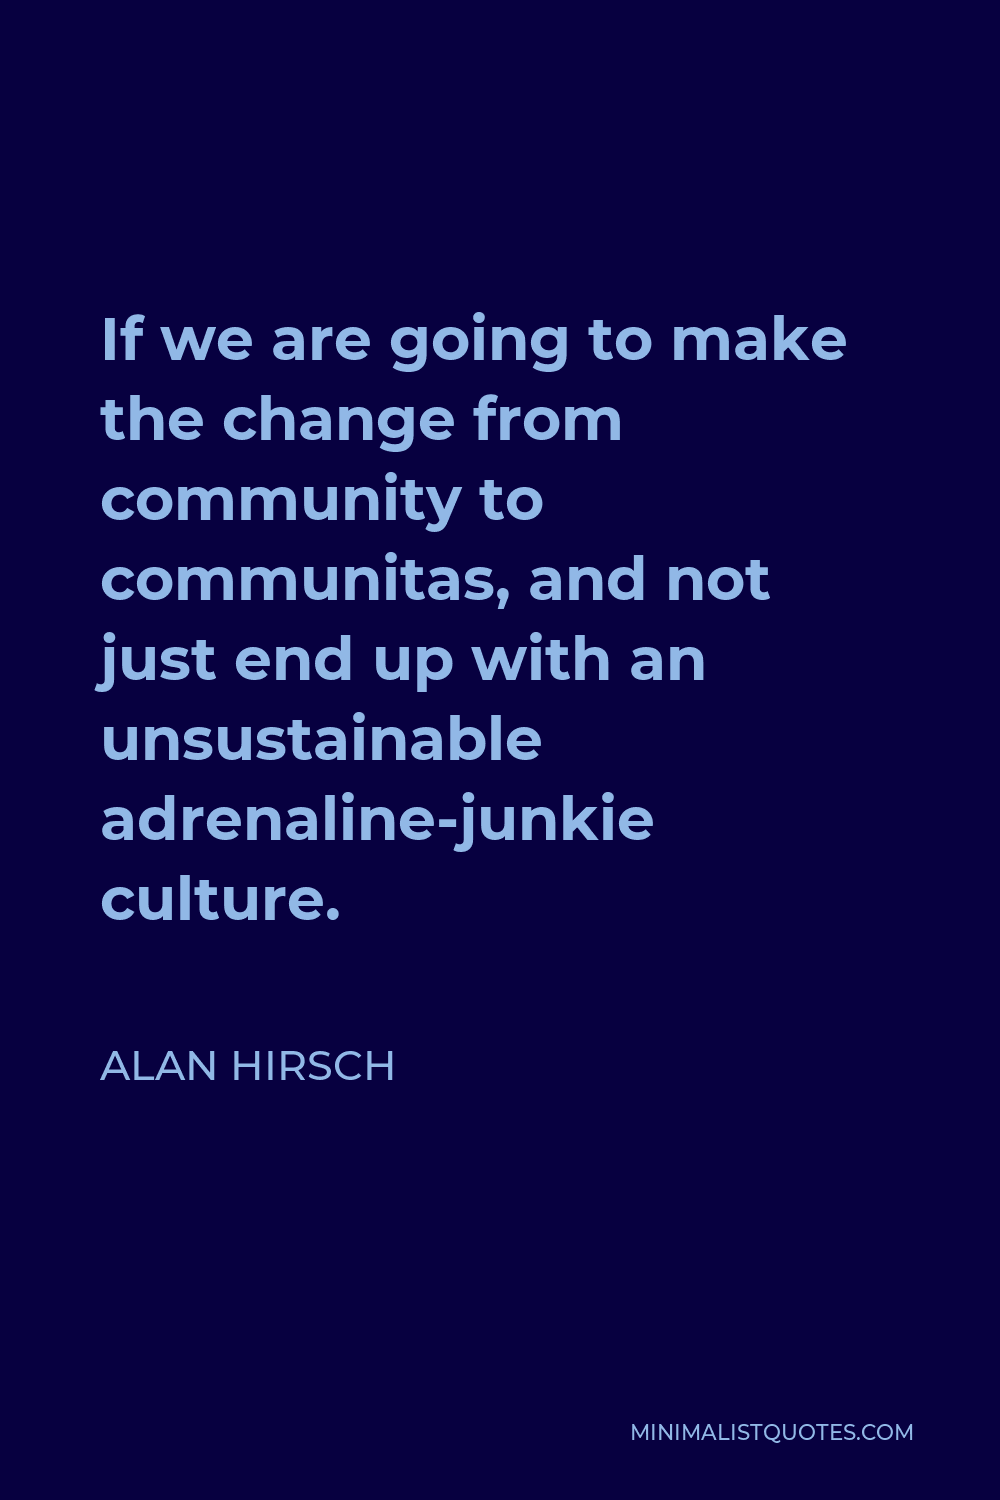 Alan Hirsch Quote - If we are going to make the change from community to communitas, and not just end up with an unsustainable adrenaline-junkie culture.